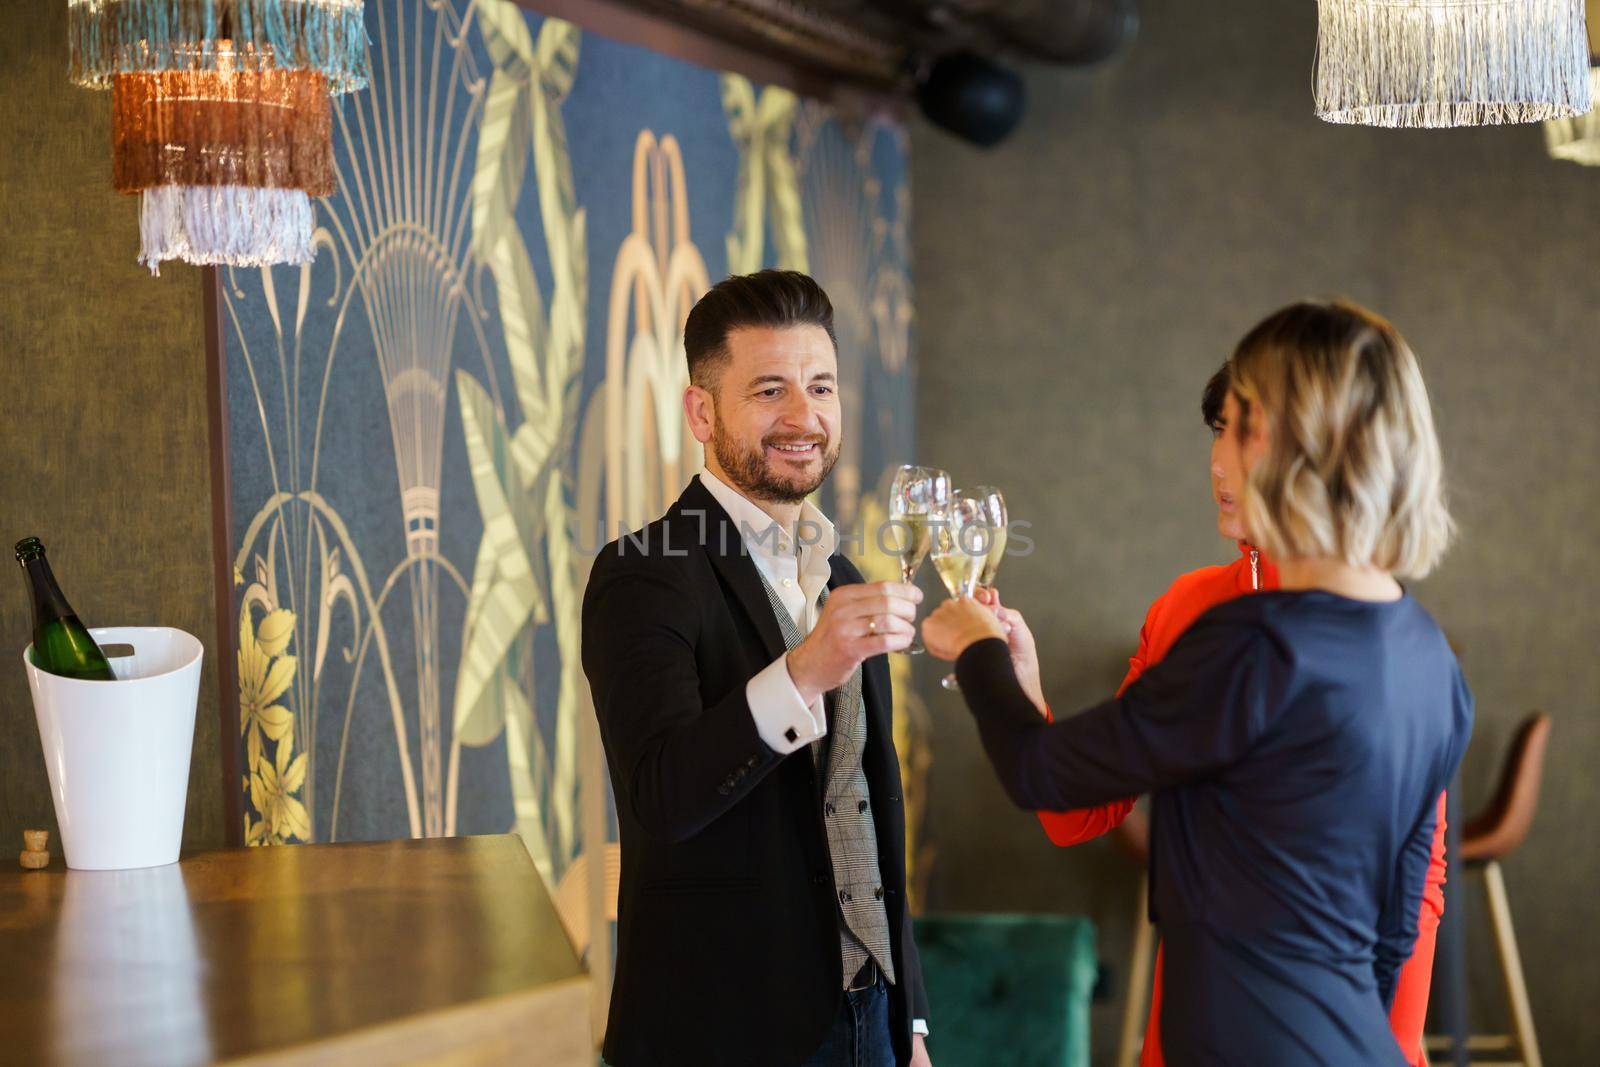 Company of cheerful friendly people in elegant outfits clicking glasses with champagne and proposing toast while celebrating event in restaurant